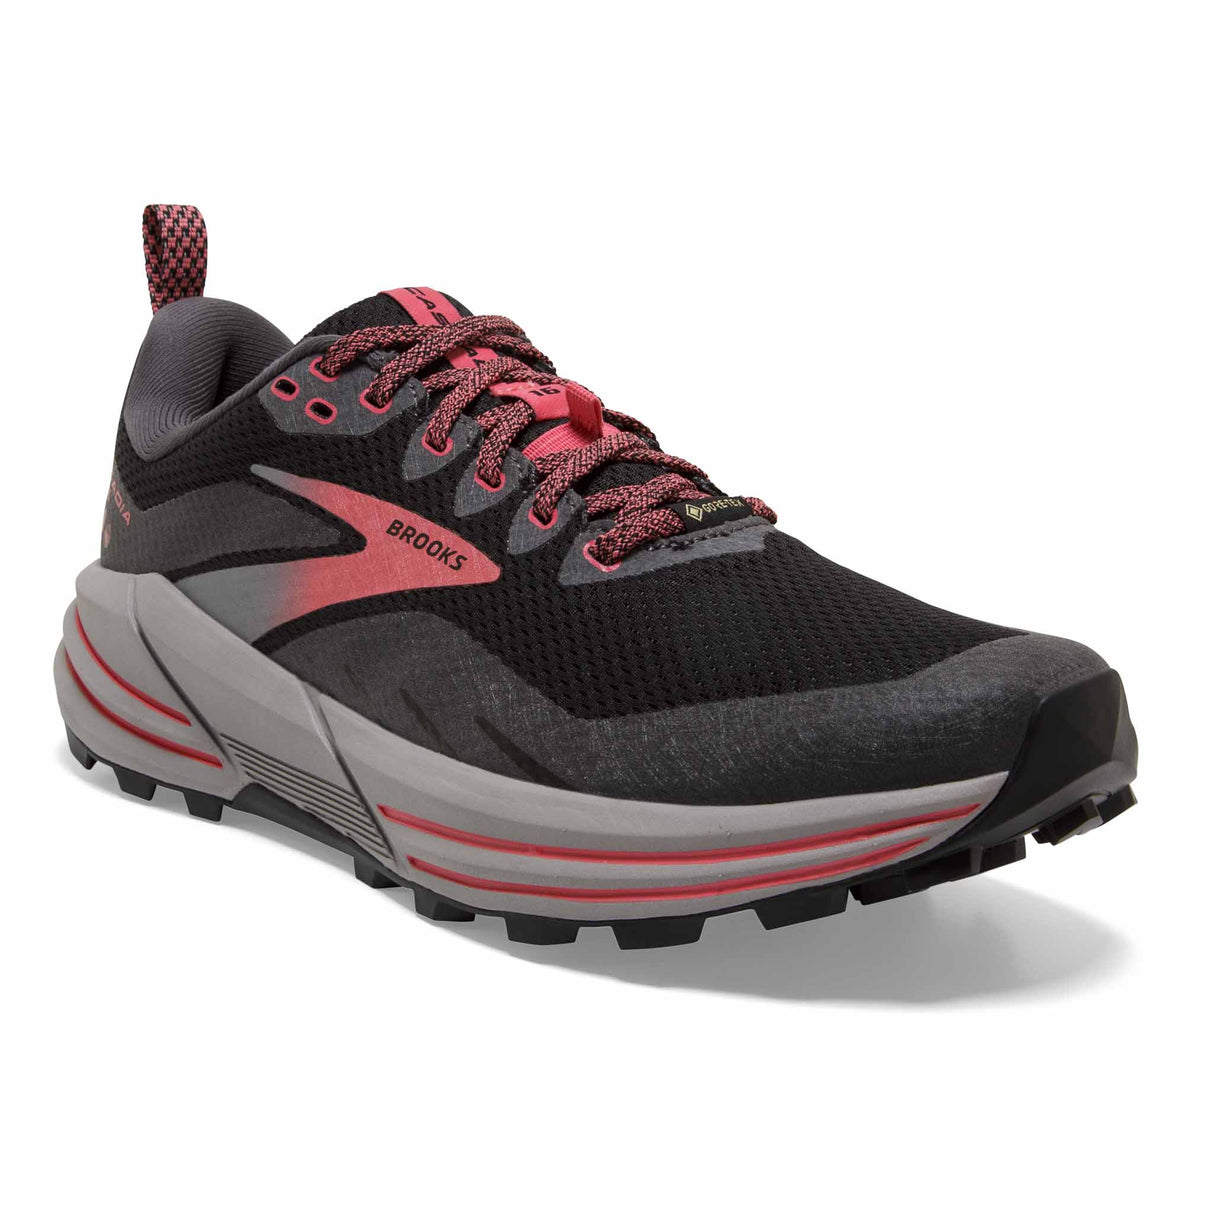 Brooks Cascadia 16 GTX chaussures de course à pied trail femme - Black / Blackened Pearl / Coral - angle